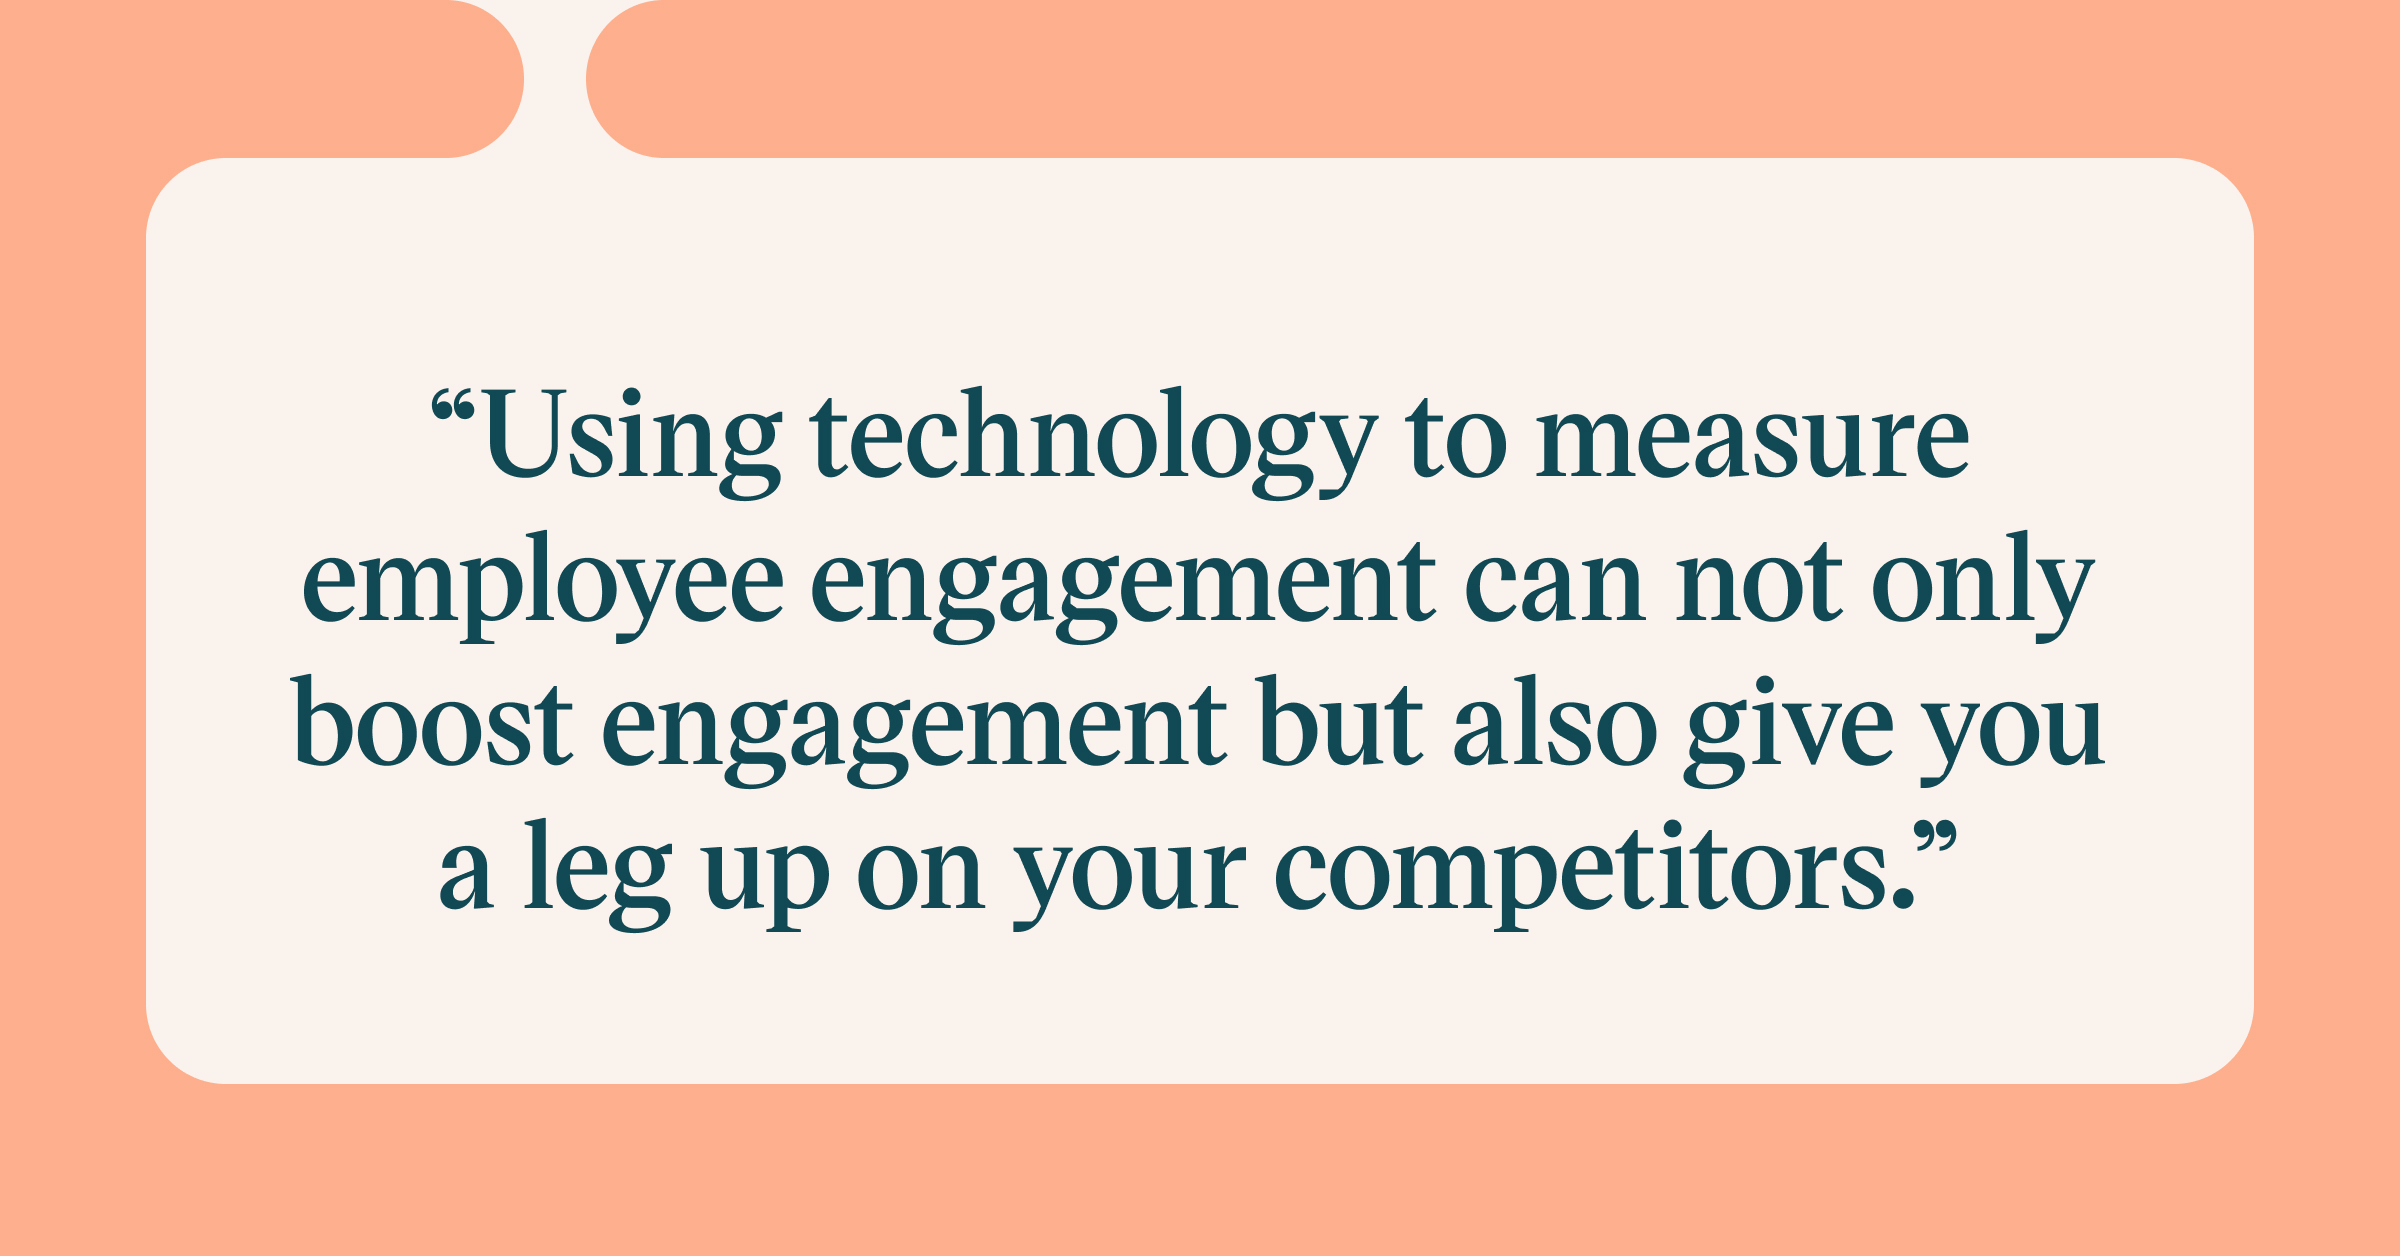 Pull quote with the text: Using technology to measure employee engagement can not only boost engagement but also give you a leg up on your competitors